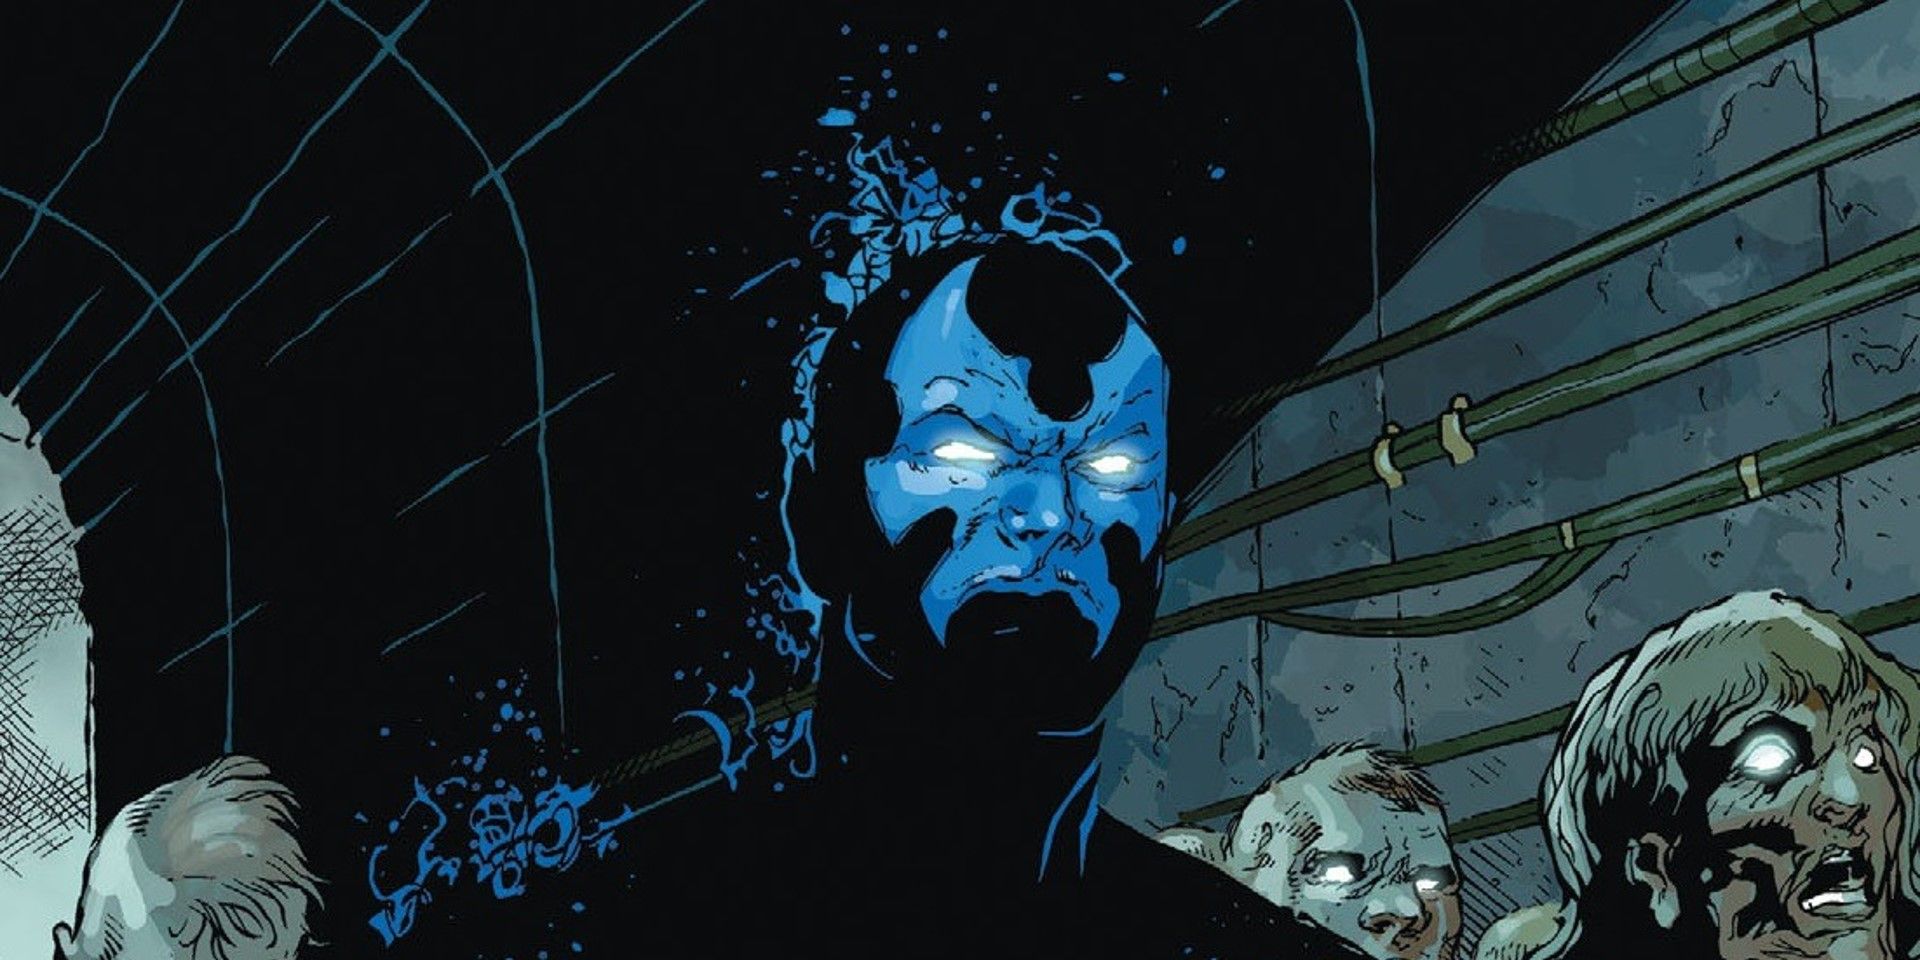 Todd Rice as Obsidian, lurking in the shadows in DC Comics